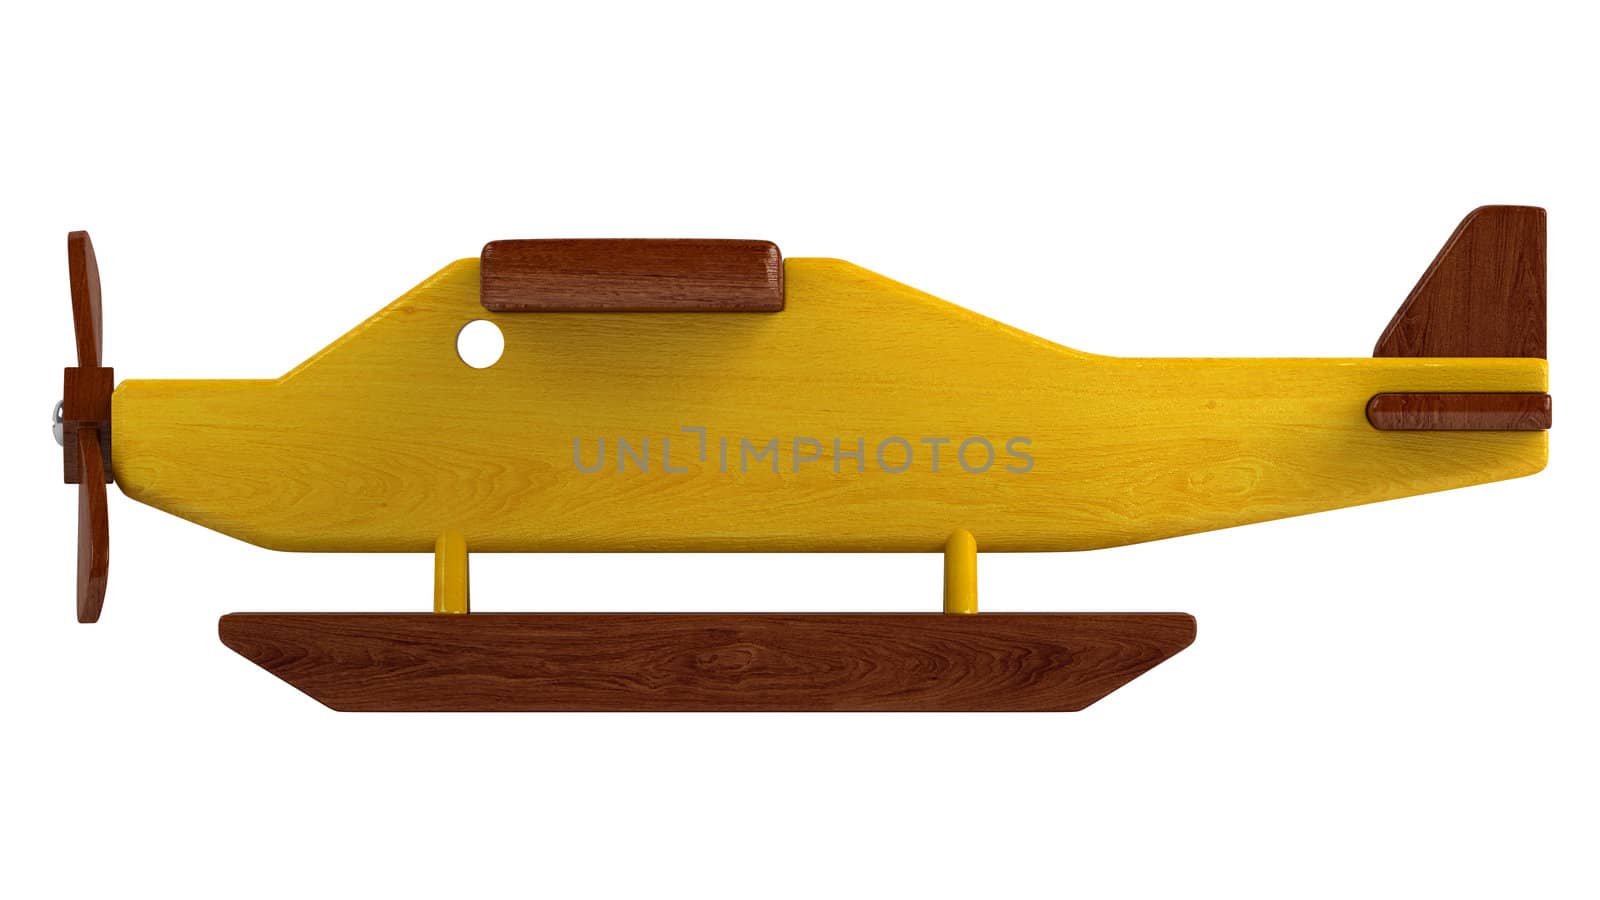 Quaint rustic wooden seaplane toy on pontoons with a propeller isolated on white